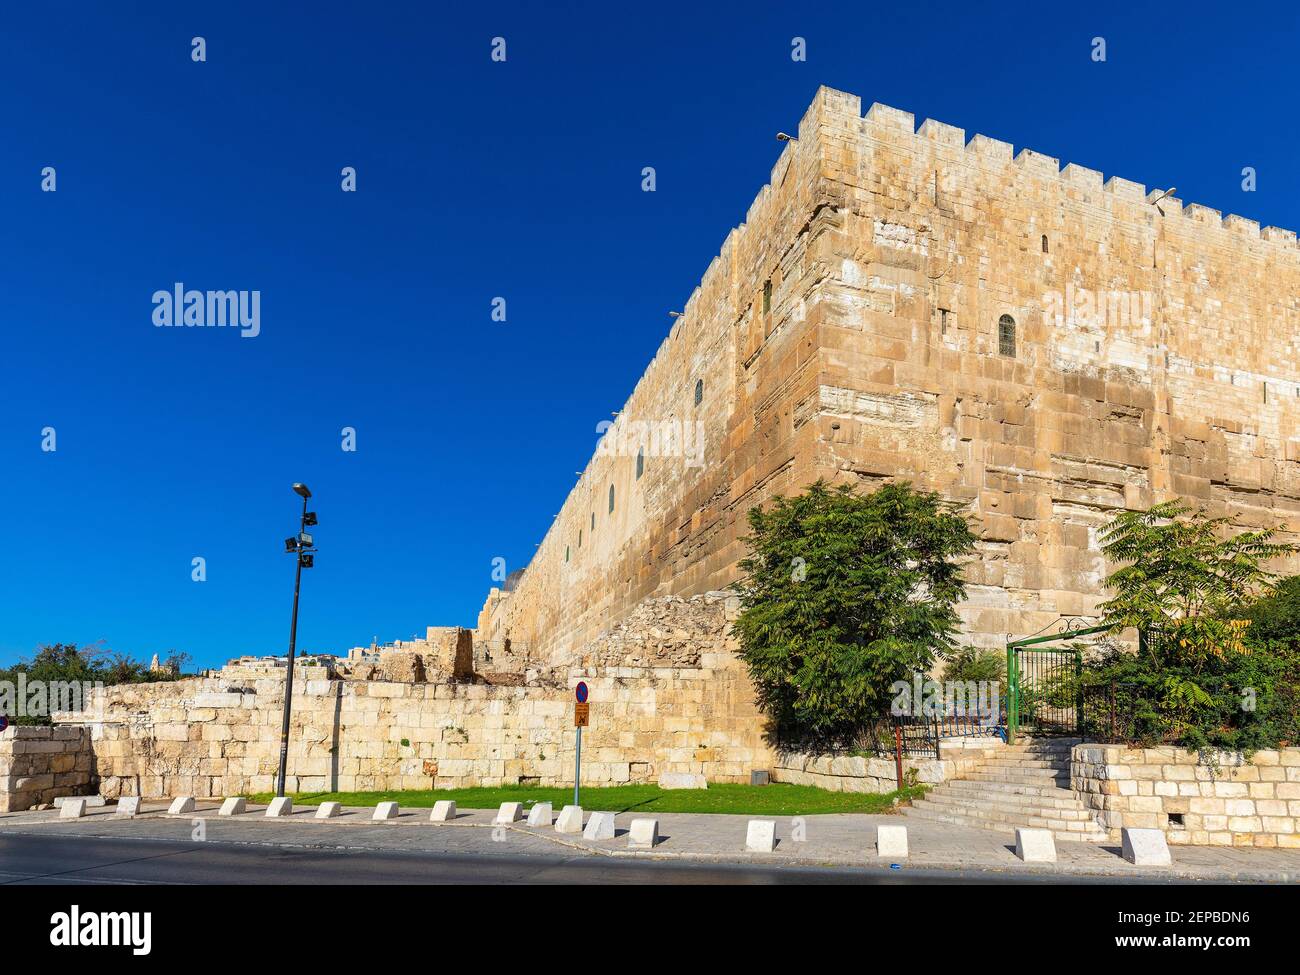 Jerusalem, Israel - October 12, 2017: South-eastern corner of Temple Mount walls with Al-Aqsa Mosque and archeological excavation site in Jerusalem Ol Stock Photo